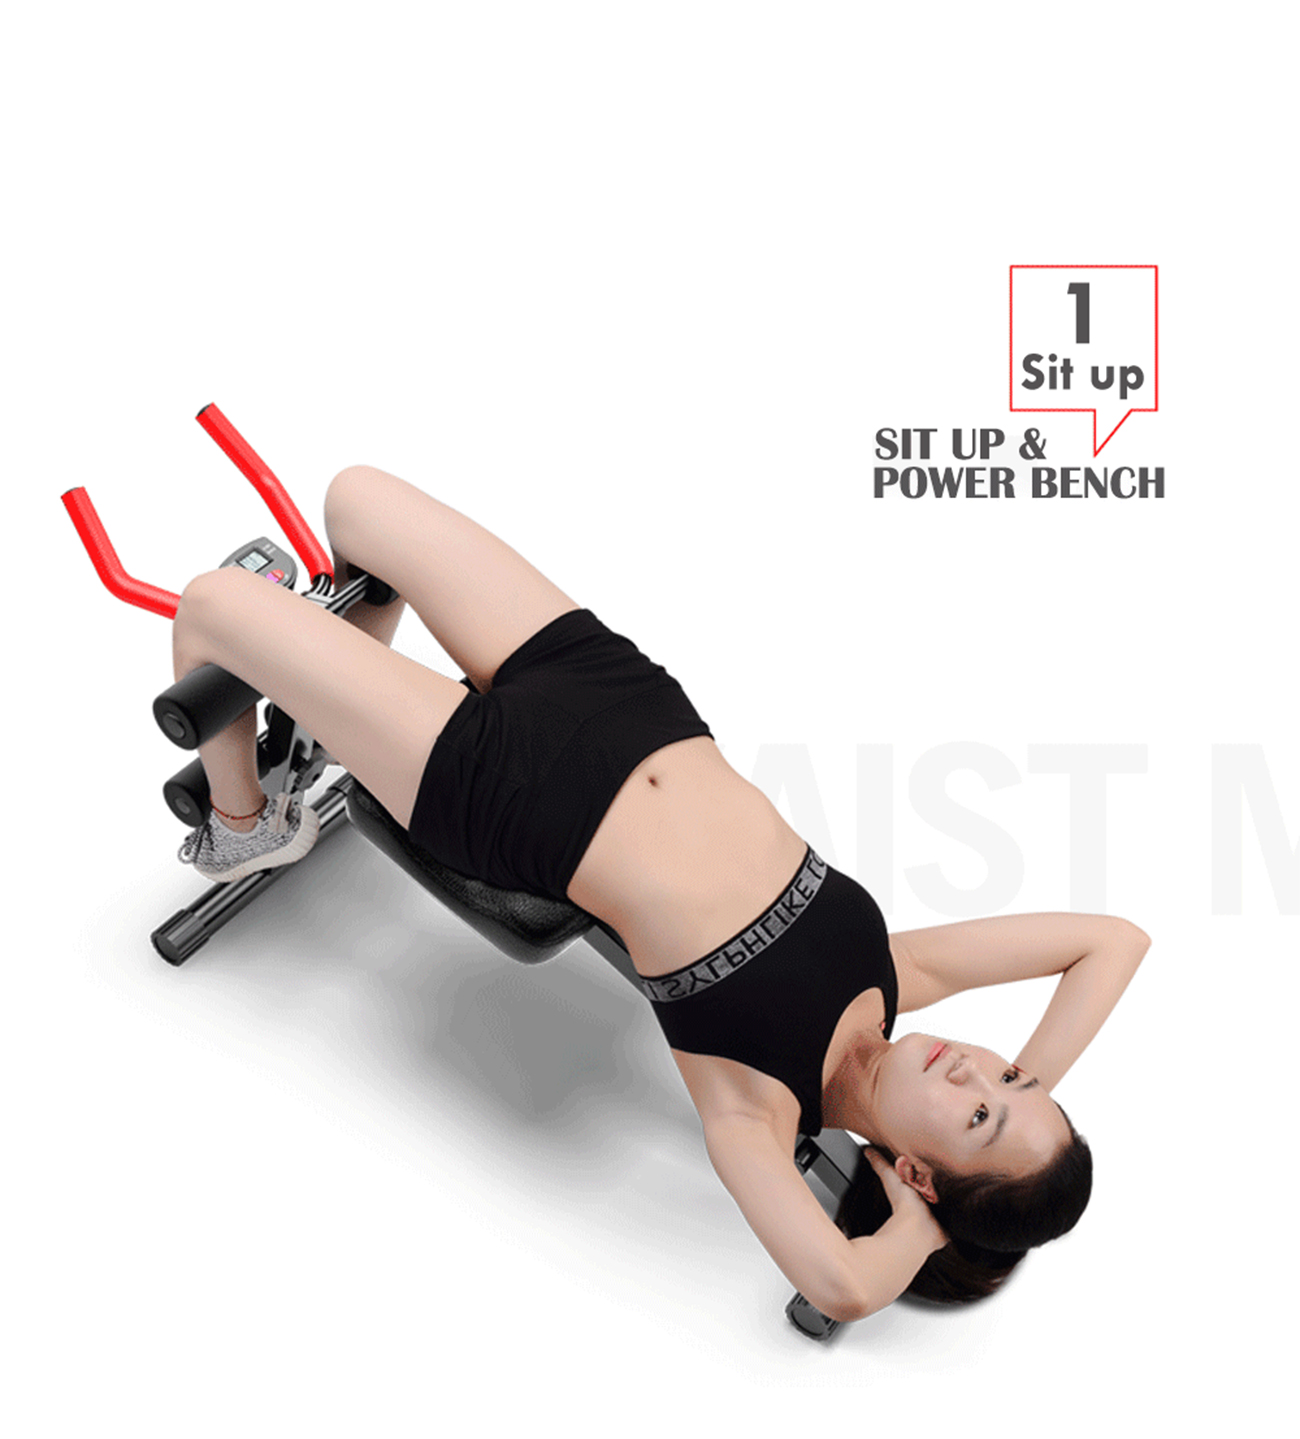 Power Plank Fitness Sit Up 2in1 รุ่น AND-605K